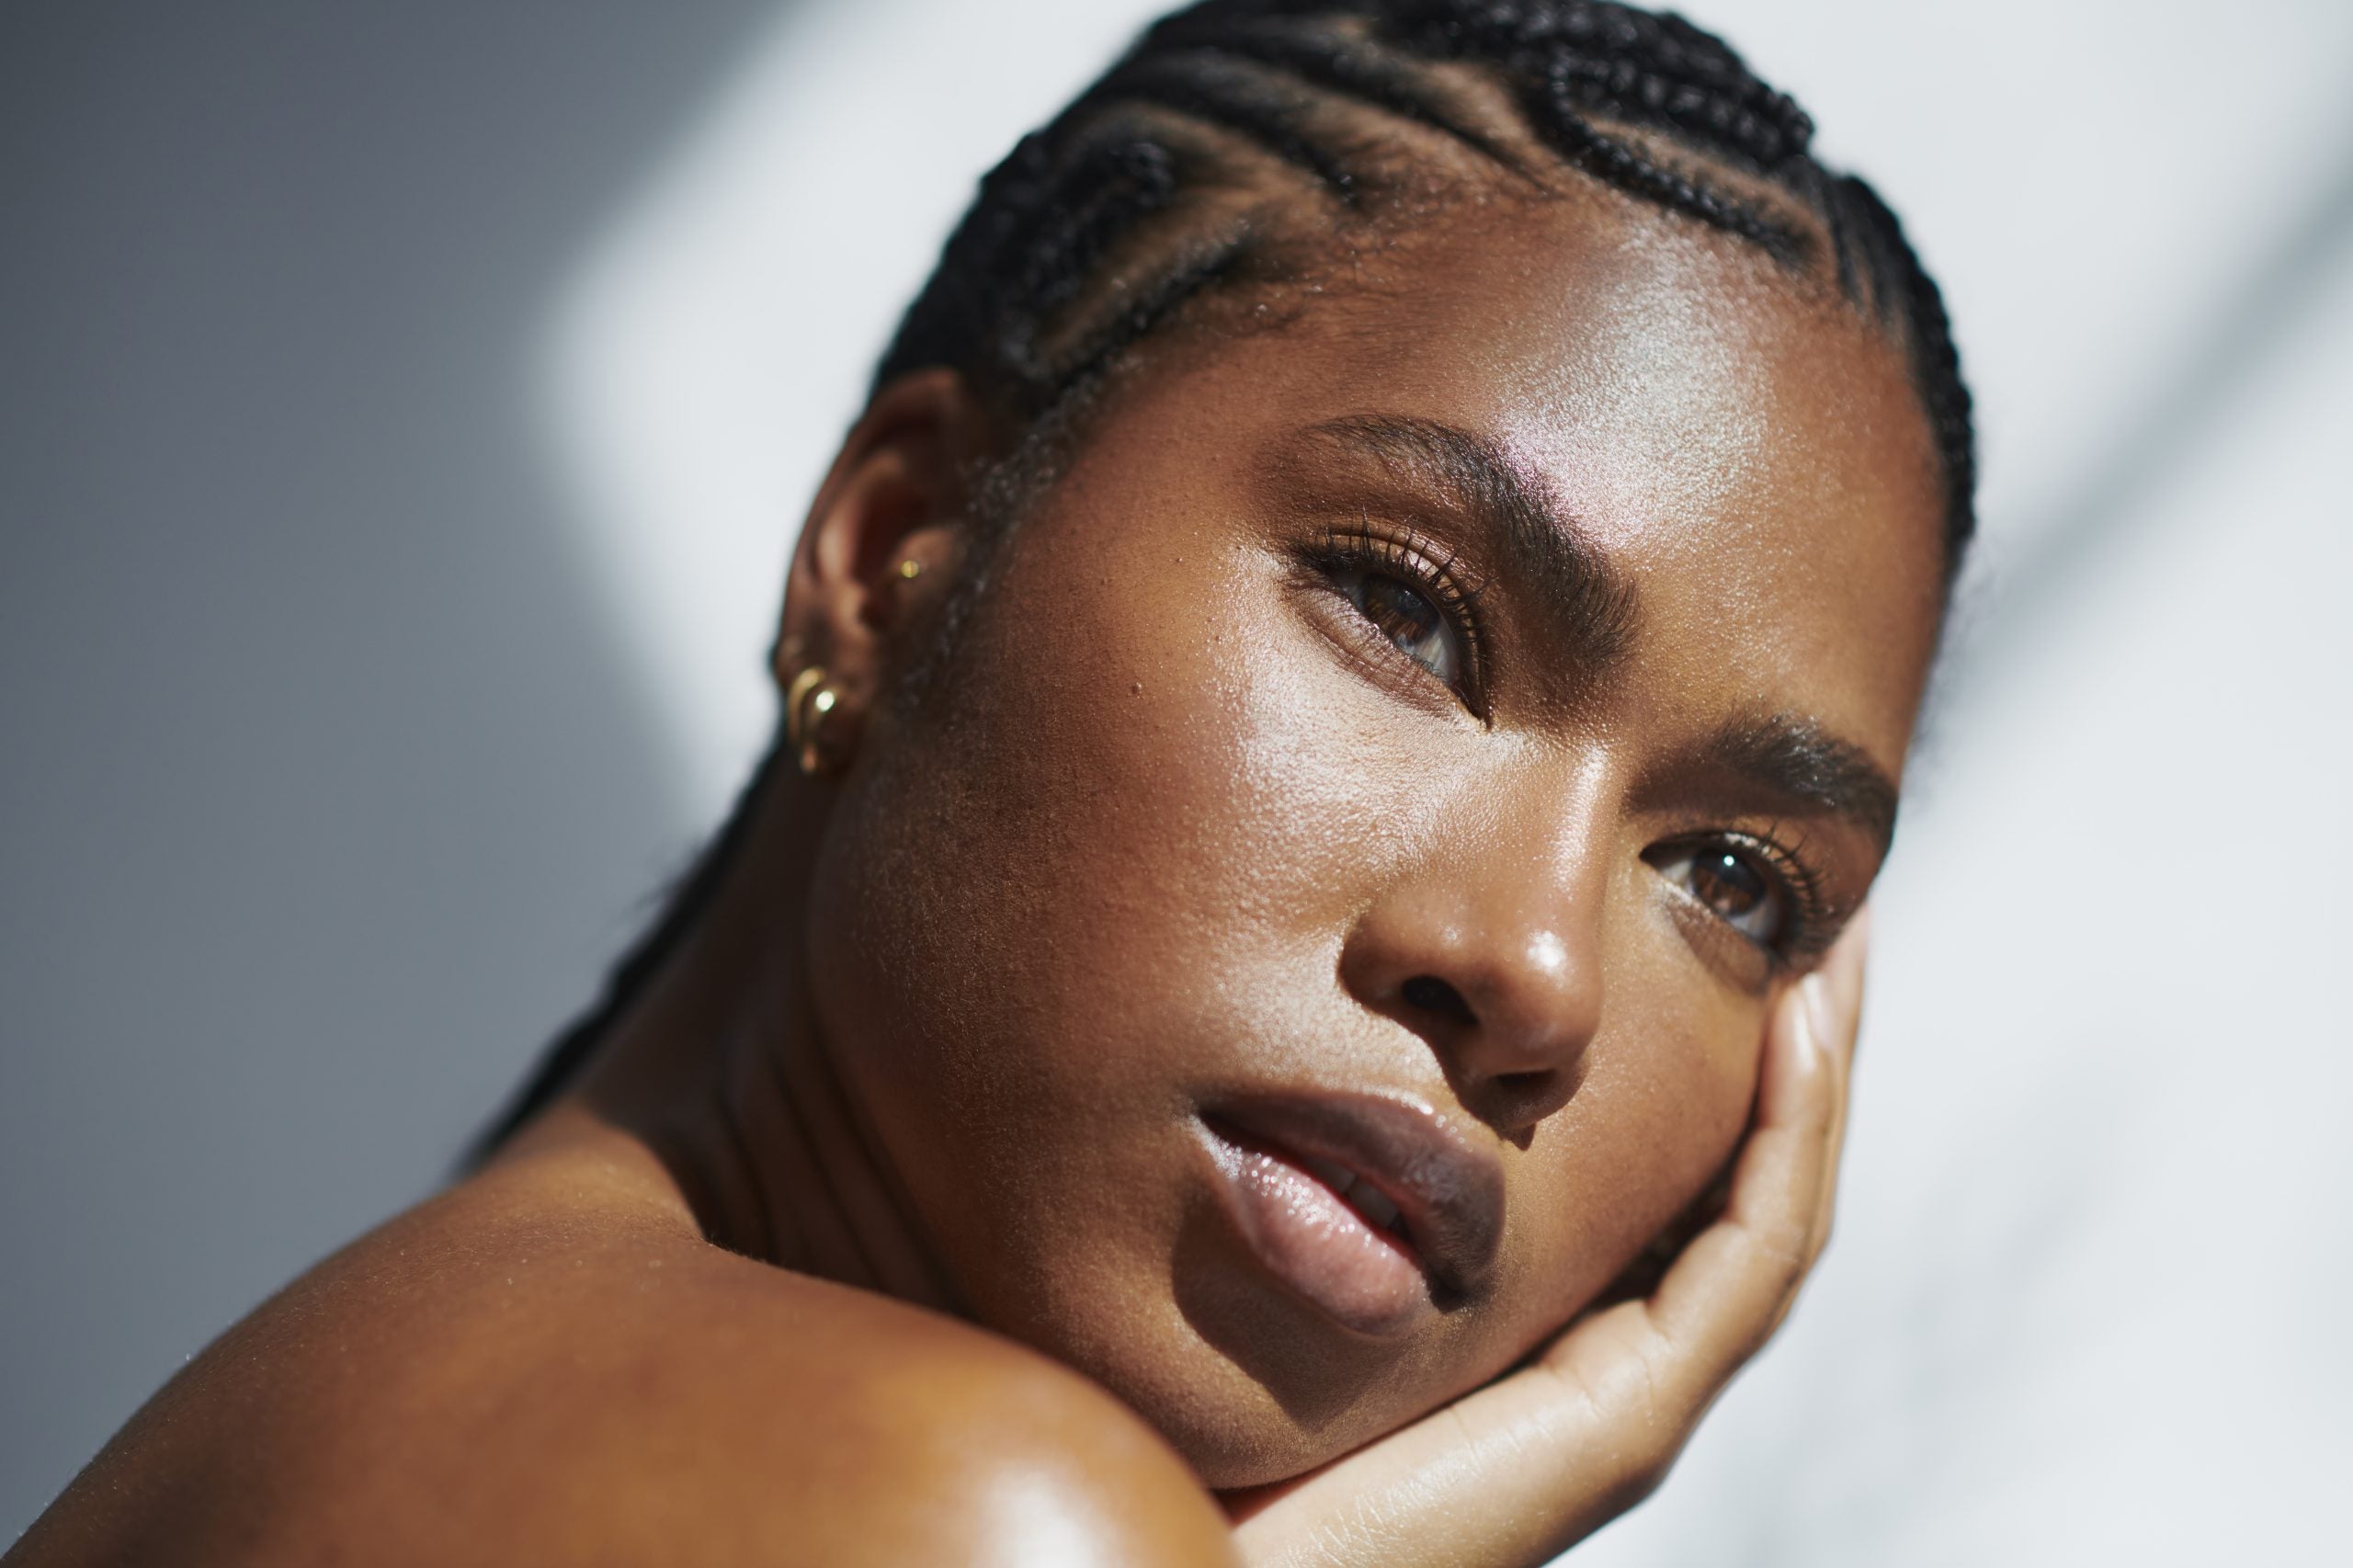 Black Can Crack: Here's How We Should Care For Our Skin This Summer And Beyond